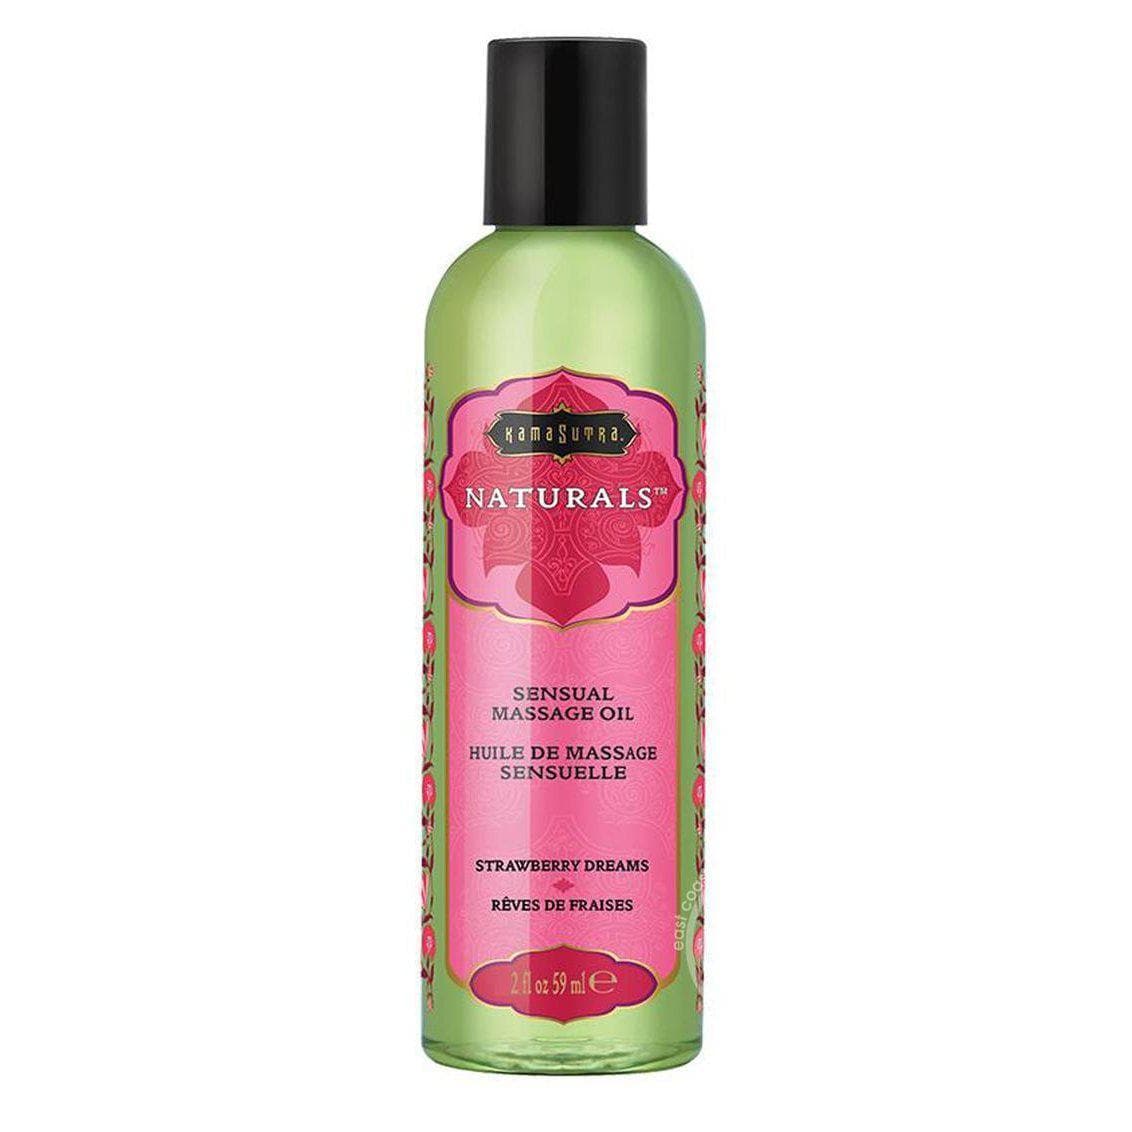 Kama Sutra Naturals Massage Oil Strawberry Dreams - Romantic Blessings